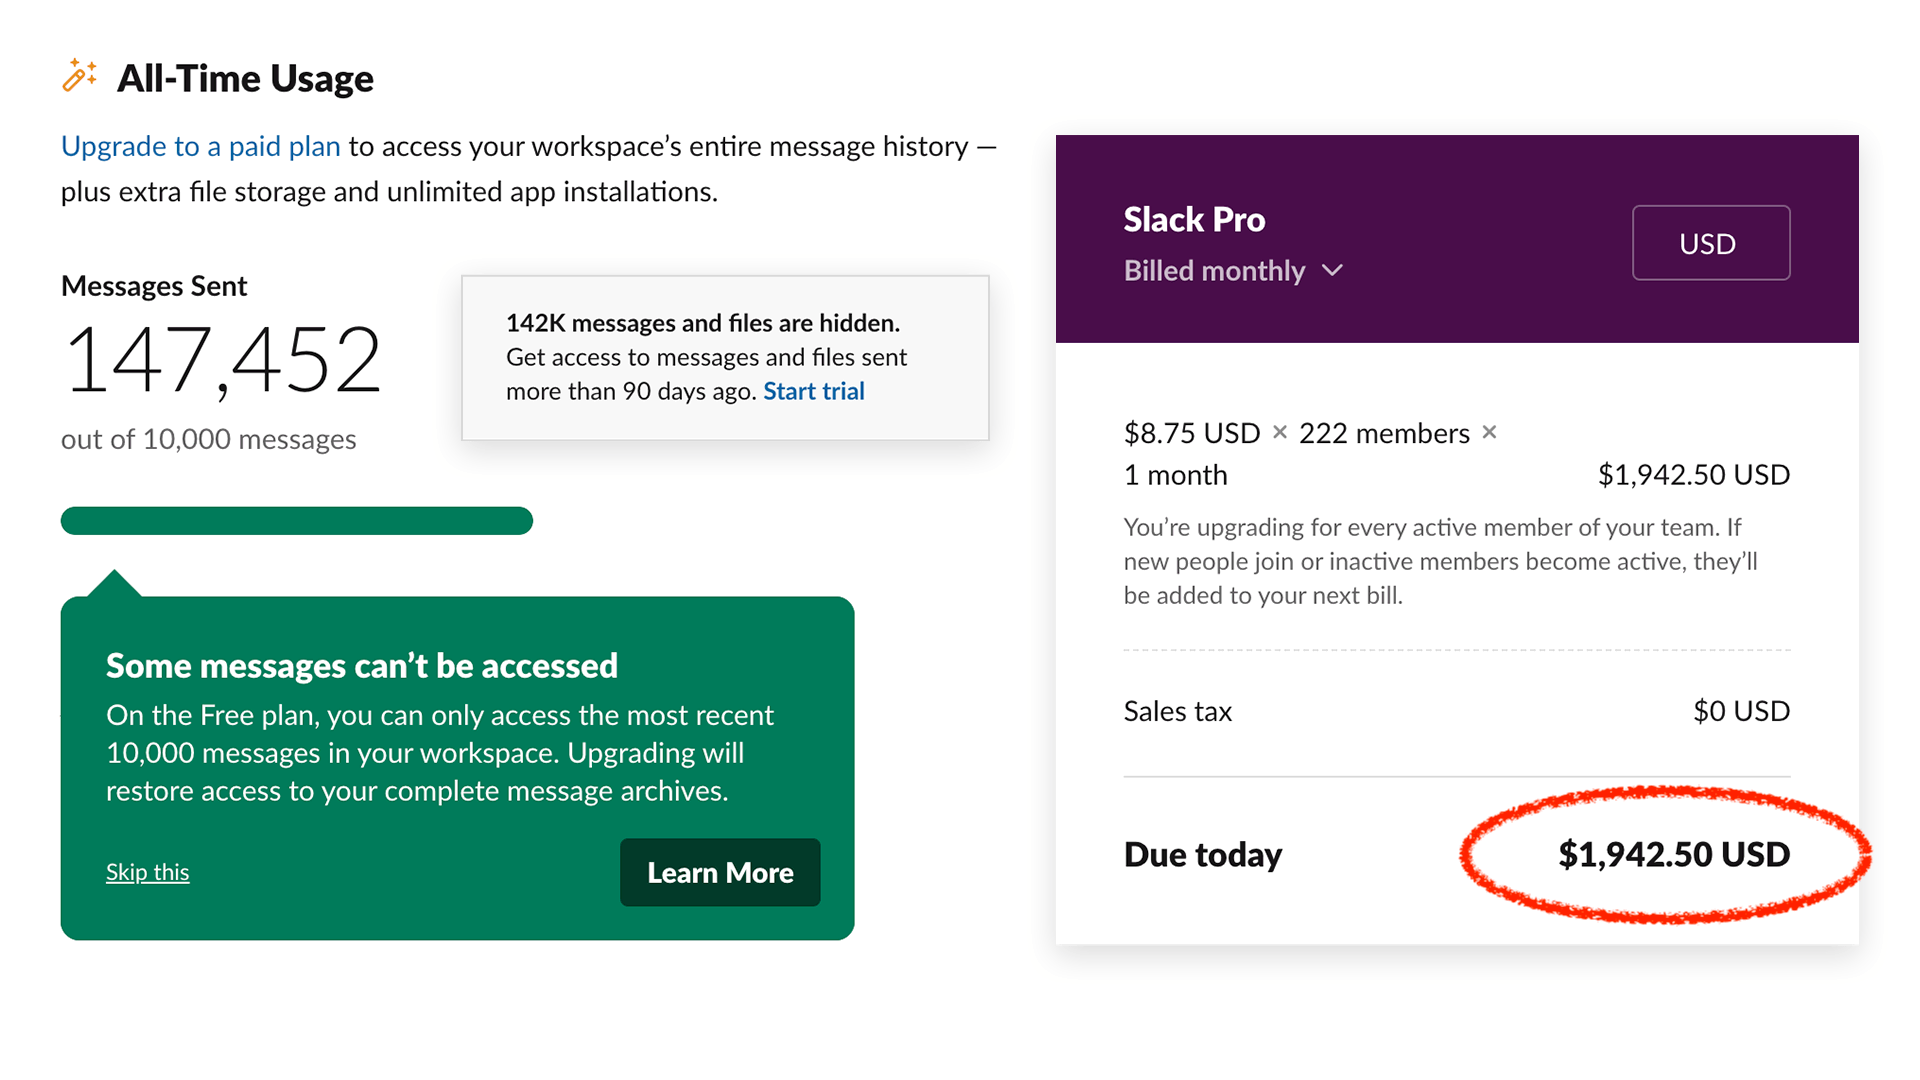 Web Performance Slack costs $1,942.50 per month to access 142,000 hidden messages and files